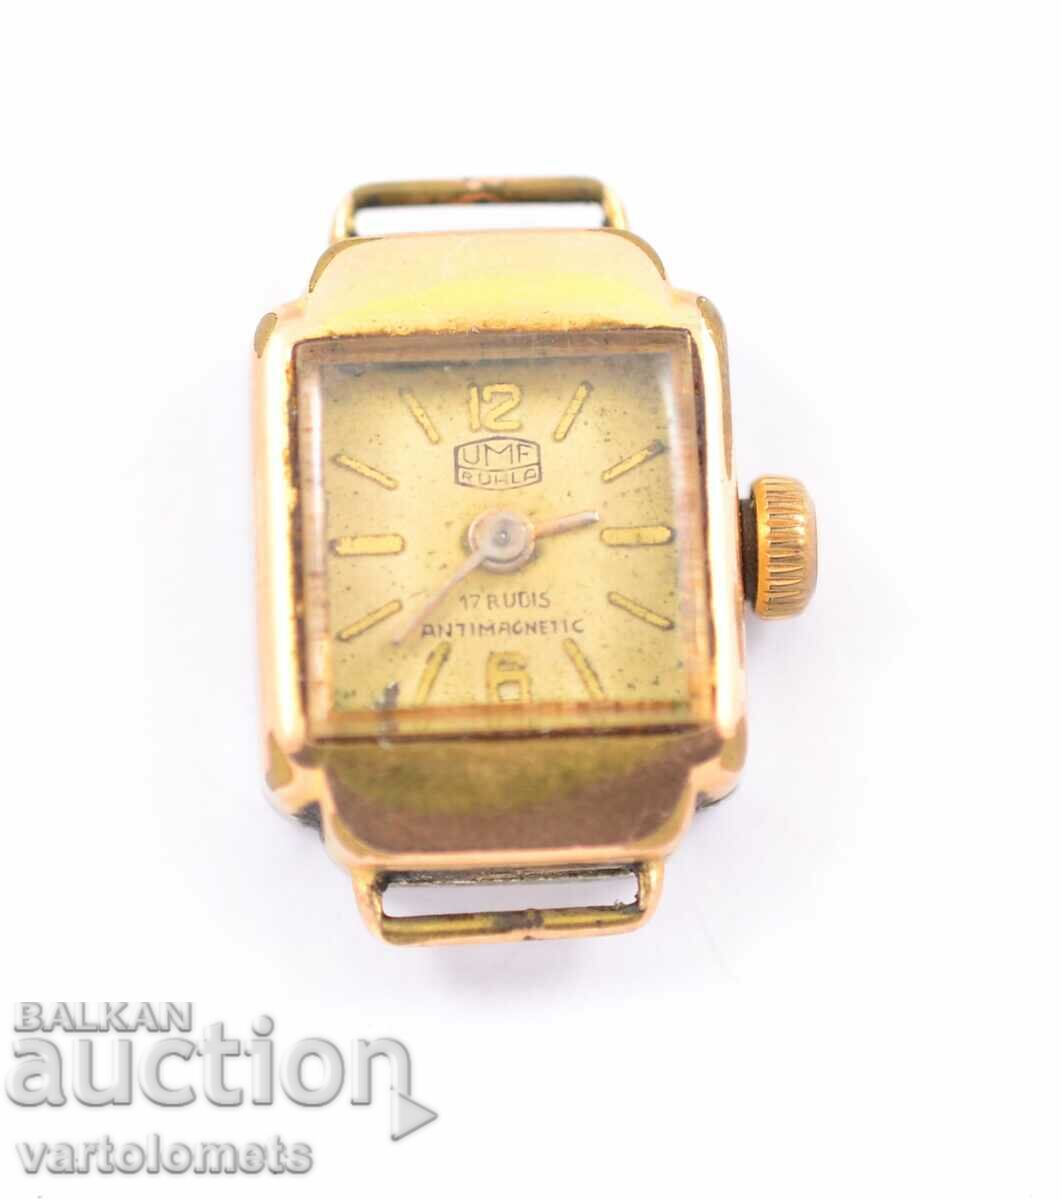 20Mk UMF RUHA Gold Plated Women's Watch - Works